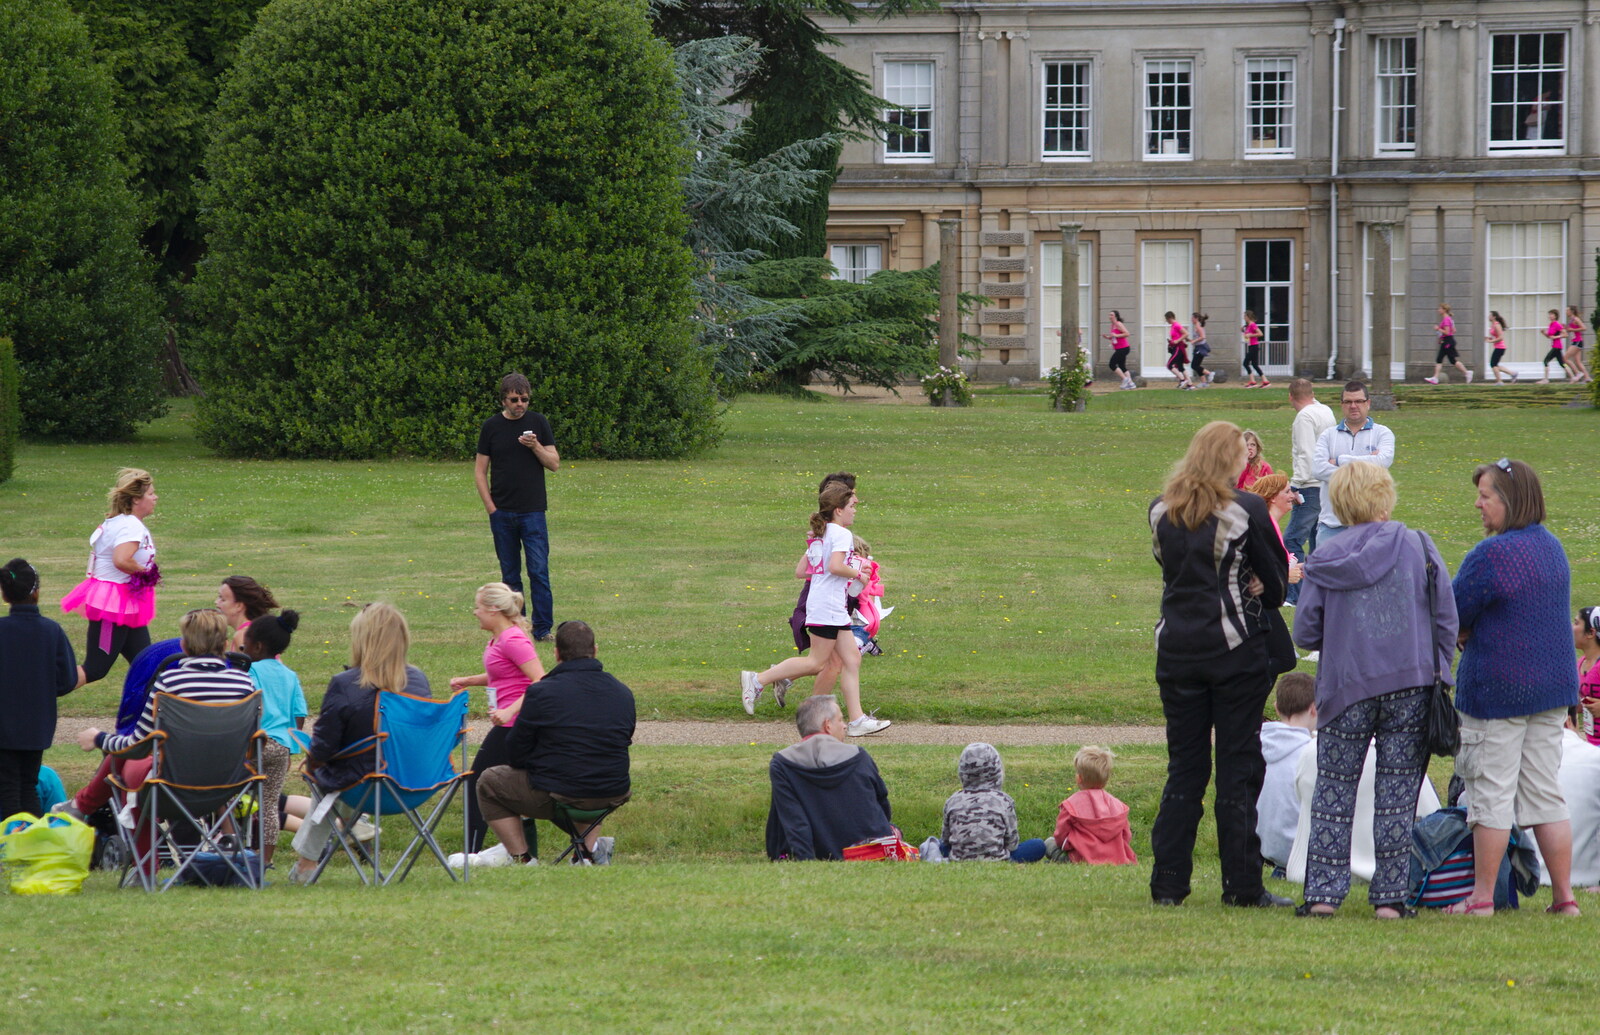 The first runners appear in front of the house from Isobel's Race For Life, Chantry Park, Ipswich - 11th June 2014